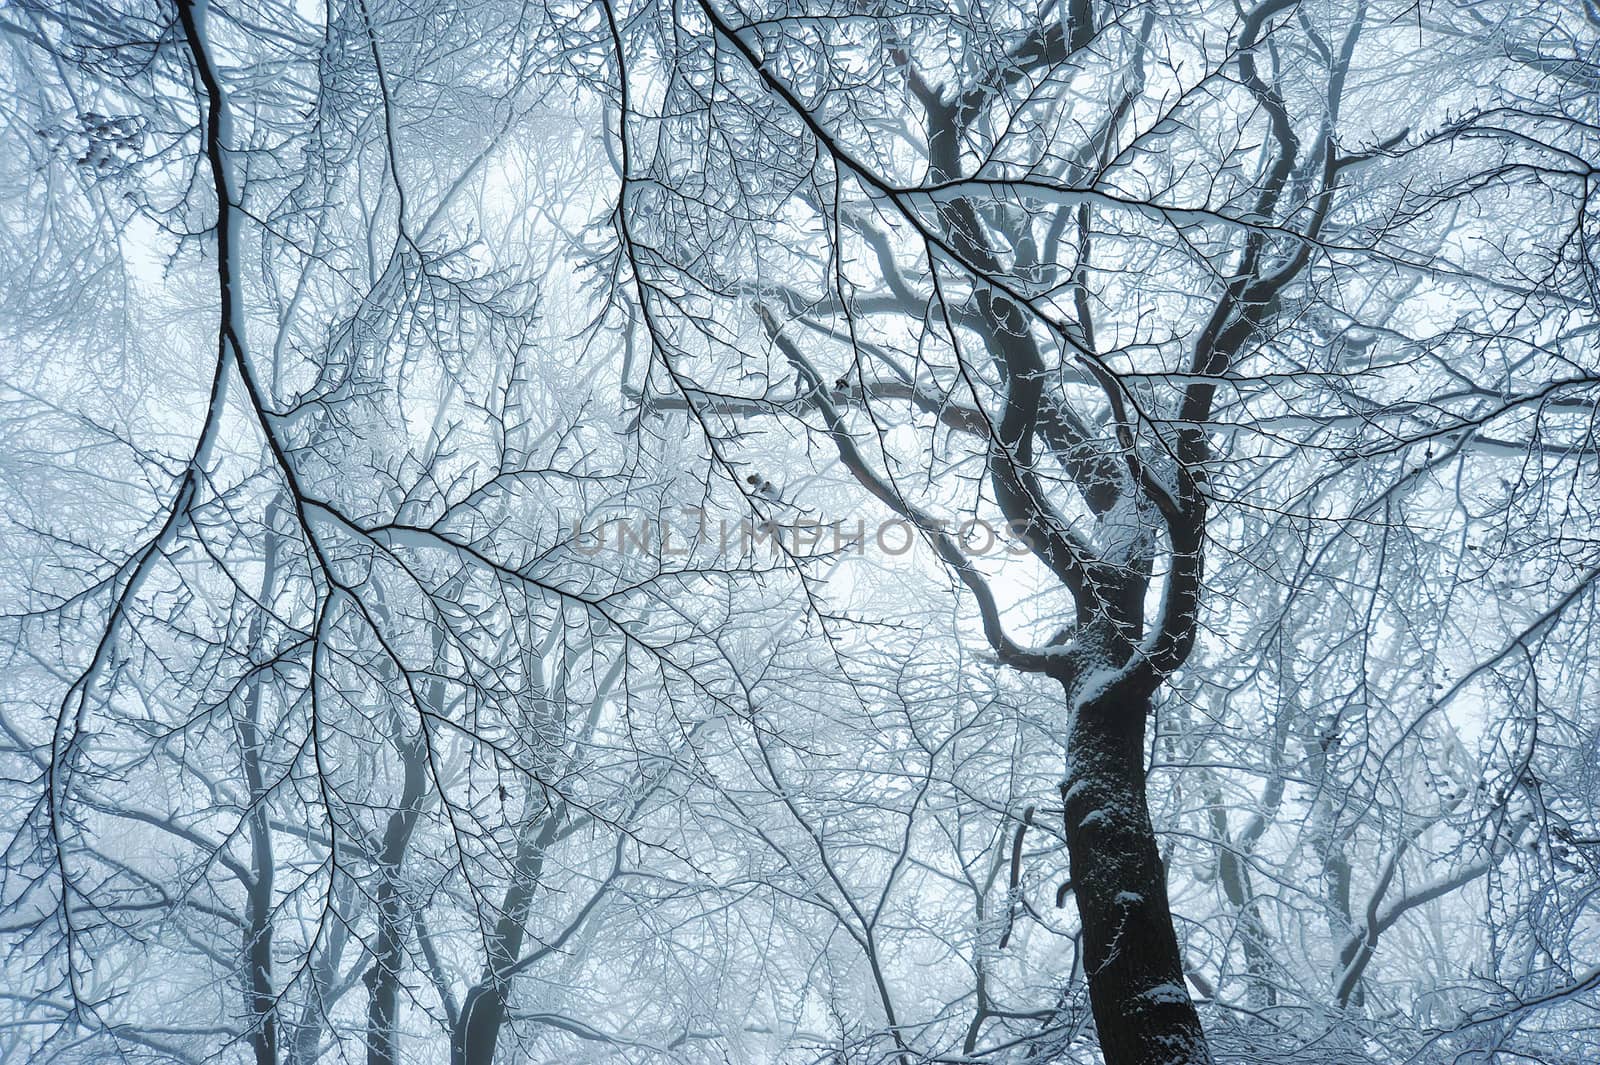 Magical winter forest in a cold winter scene